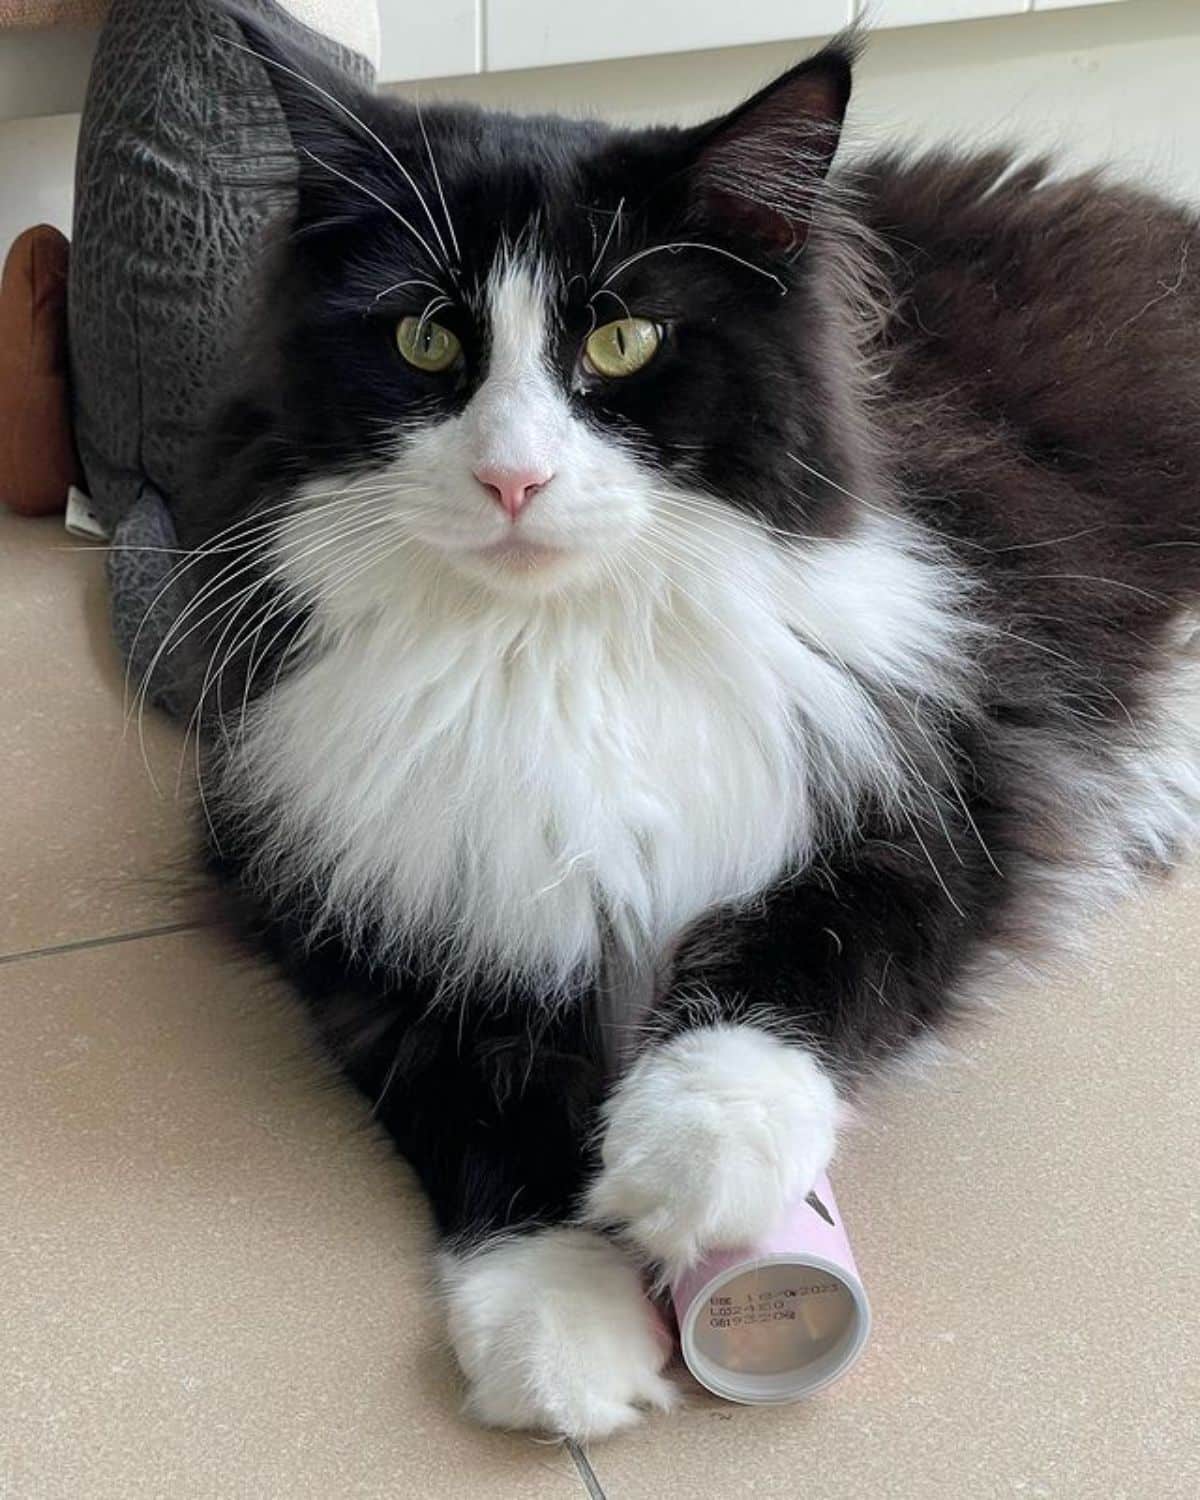 A tuxedo maine coon lying on a floor and touching some kind of a toy.